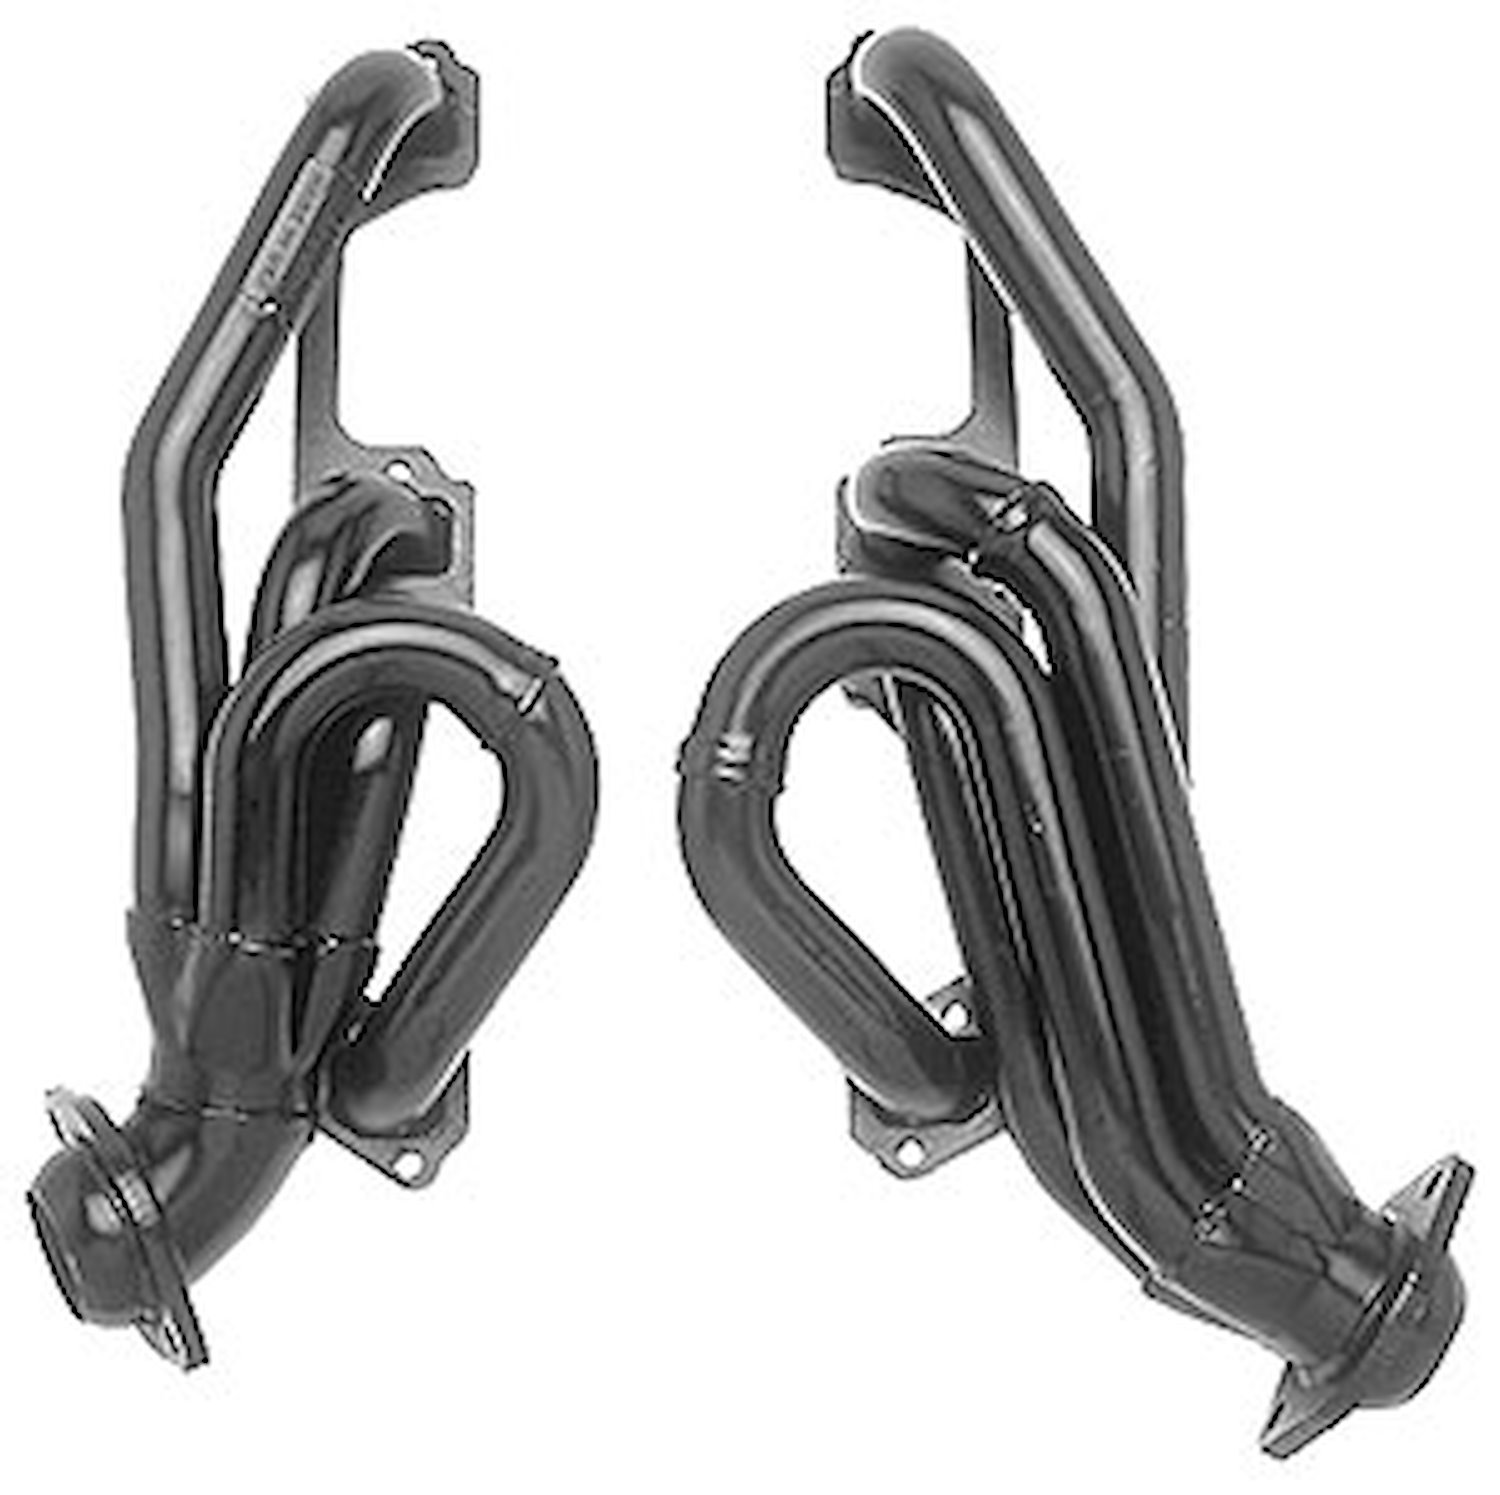 Standard Duty Uncoated Headers for 1996-2003 1/2 to 3/4 Ton 5.2L/5.9L